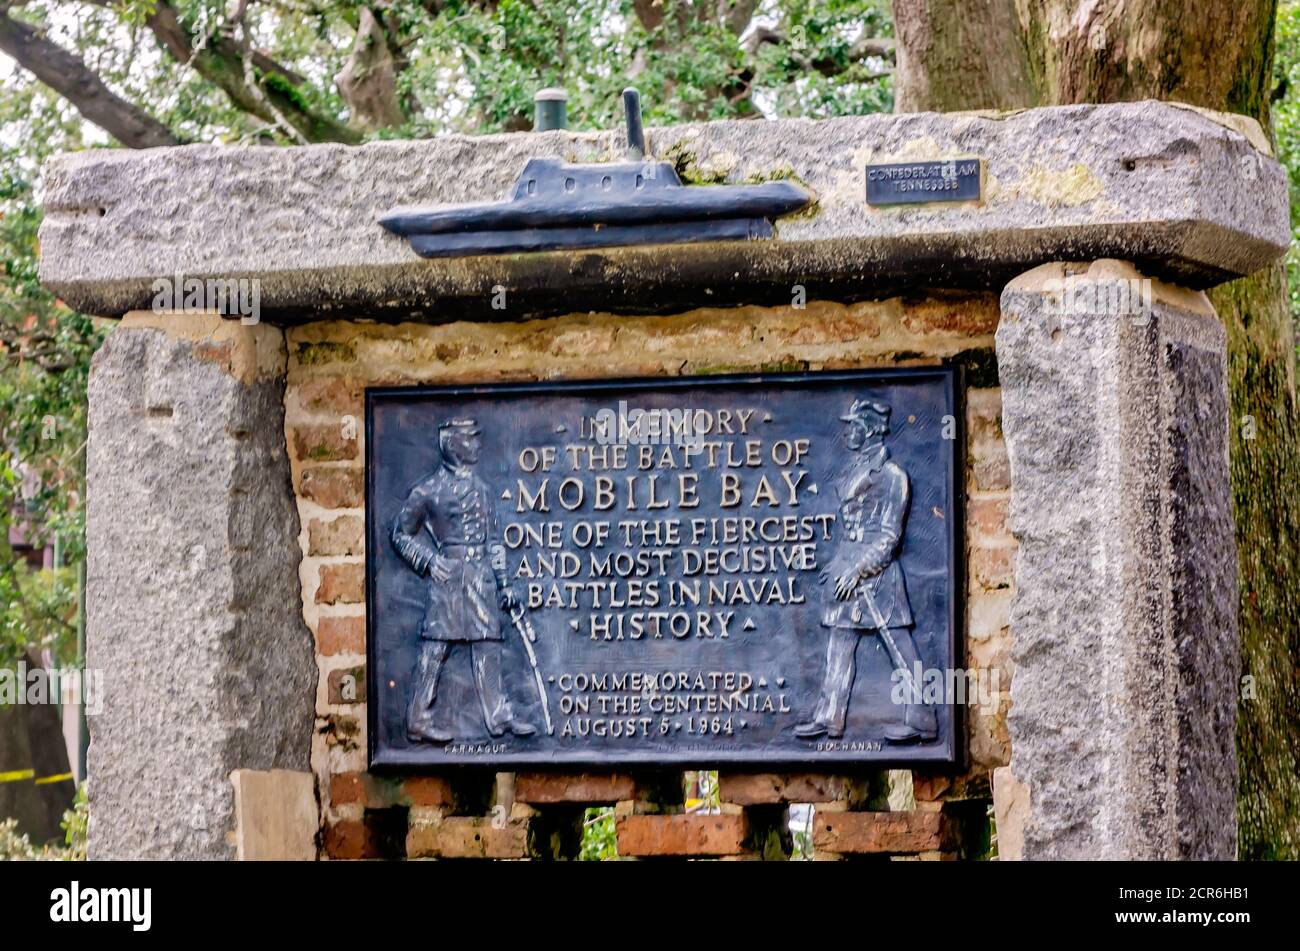 The Battle of Mobile Bay is commemorated with a historic plaque in Bienville Square, Sept. 17, 2020, in Mobile, Alabama. Stock Photo